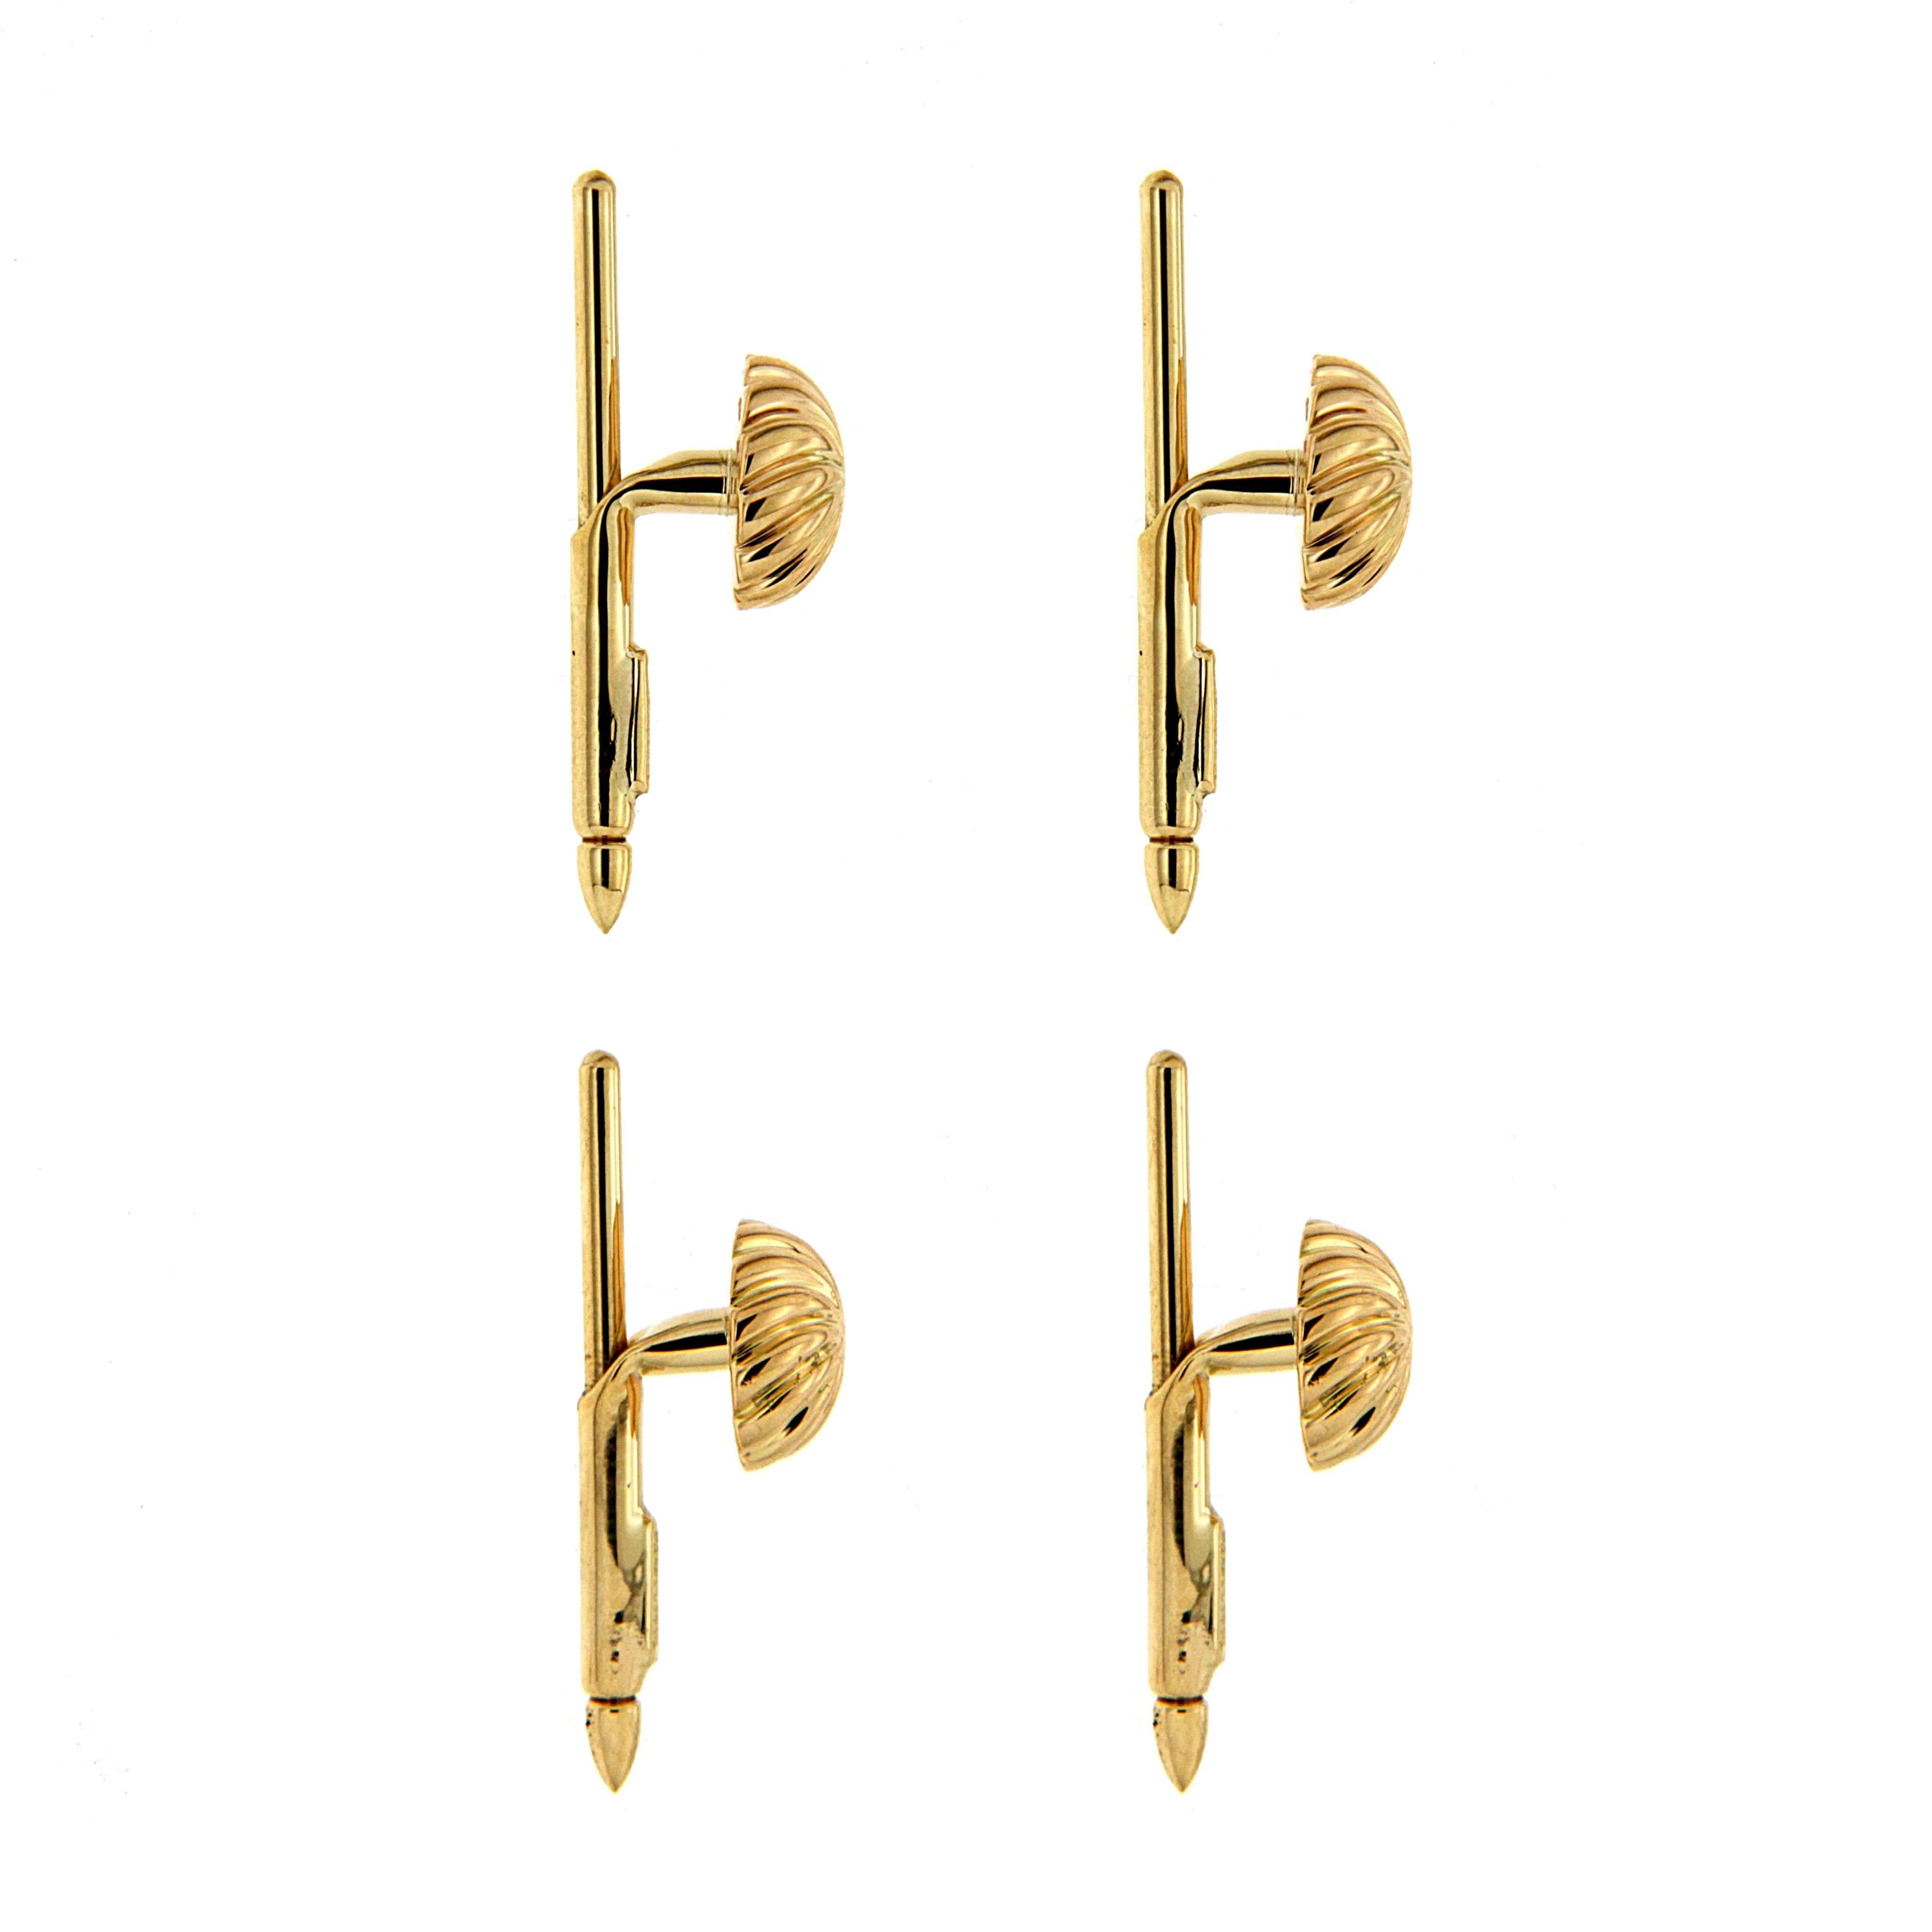 These fluted swirl shirt studs are made in 18kt yellow gold. 